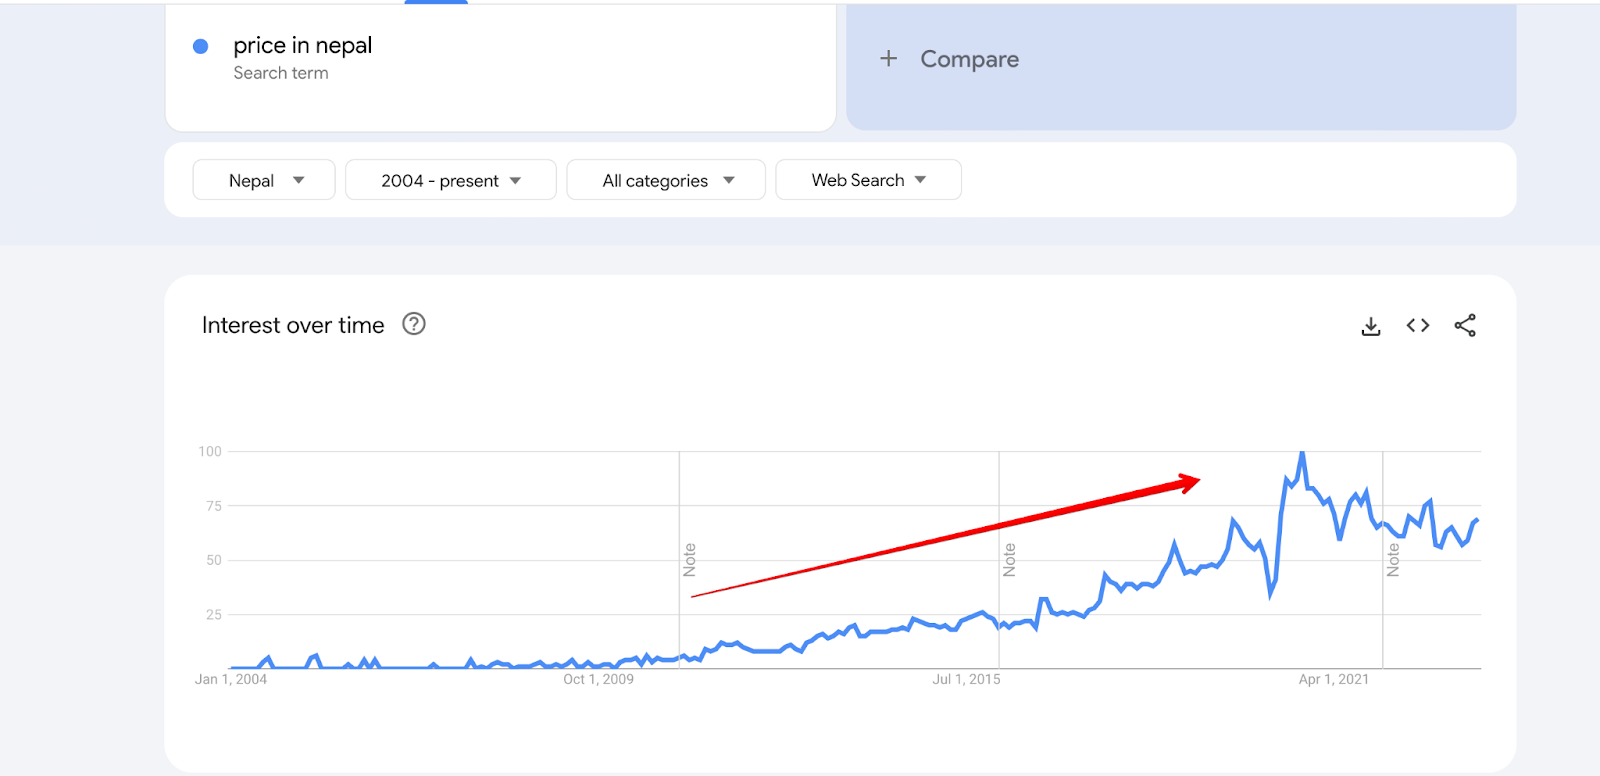 google trends price in nepal changes